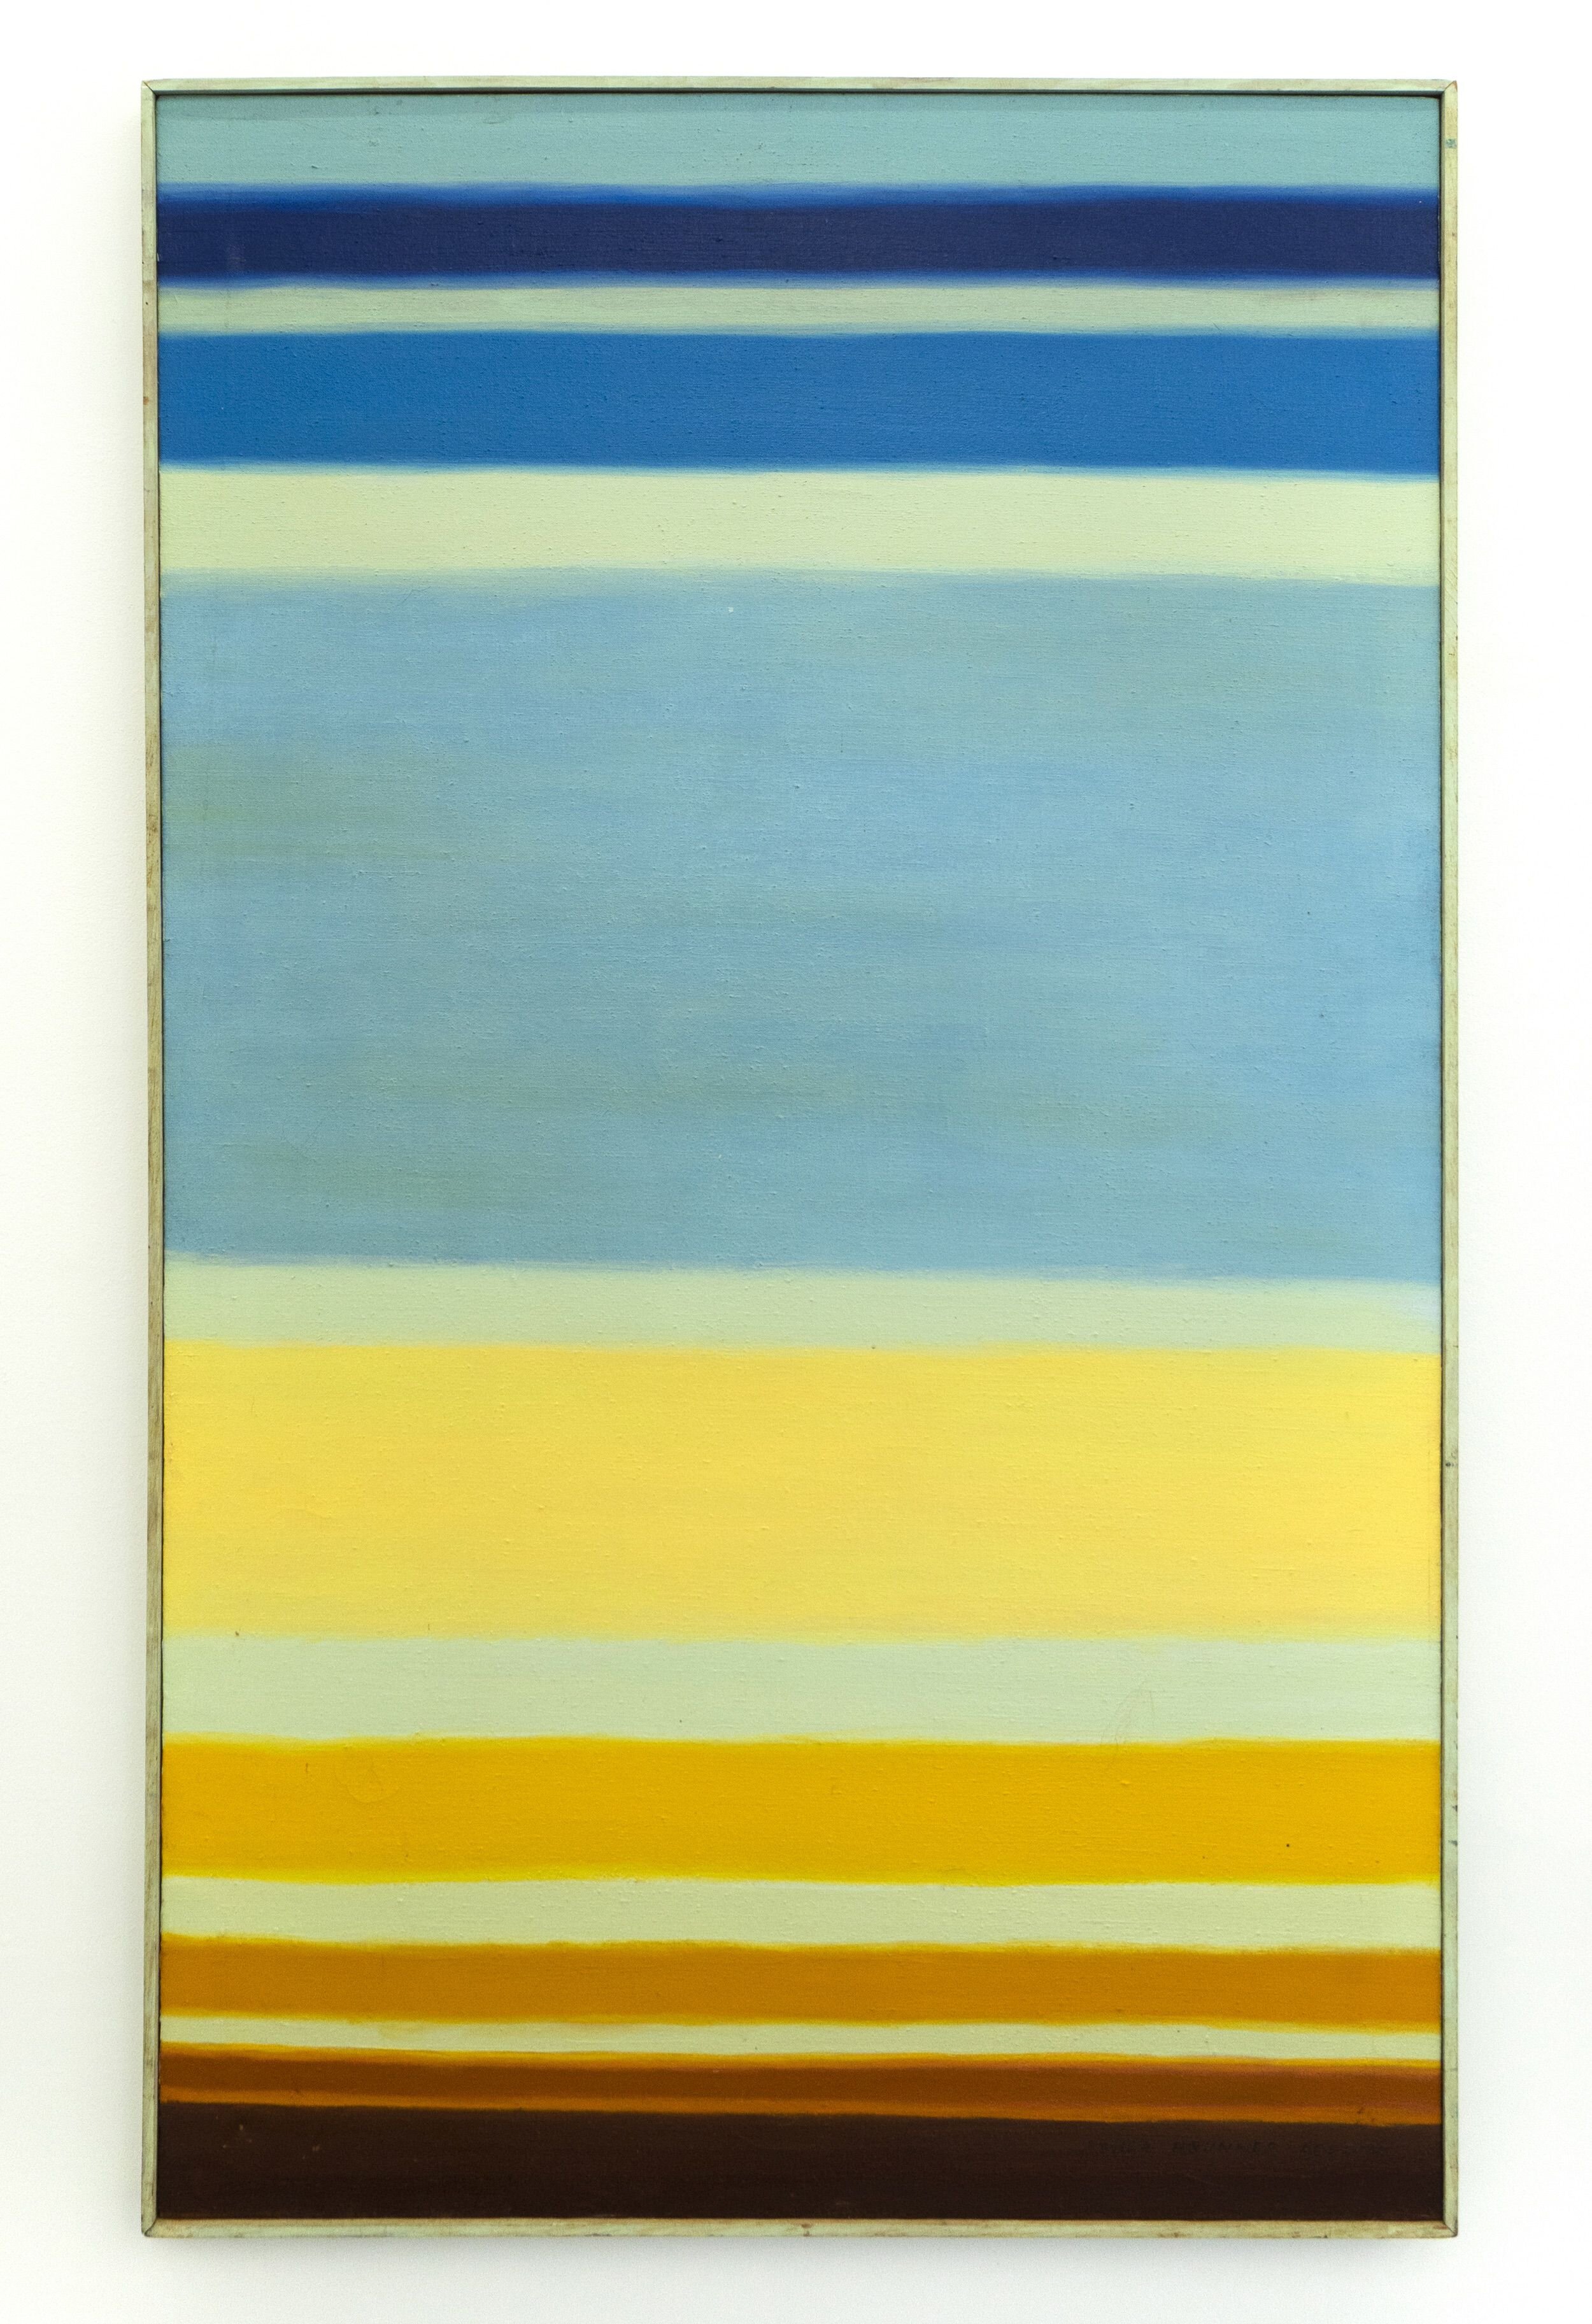  Paula Brunner Abelow  Sunset , 1968 Oil on linen with artist’s frame 48.5 x 29.5 inches 